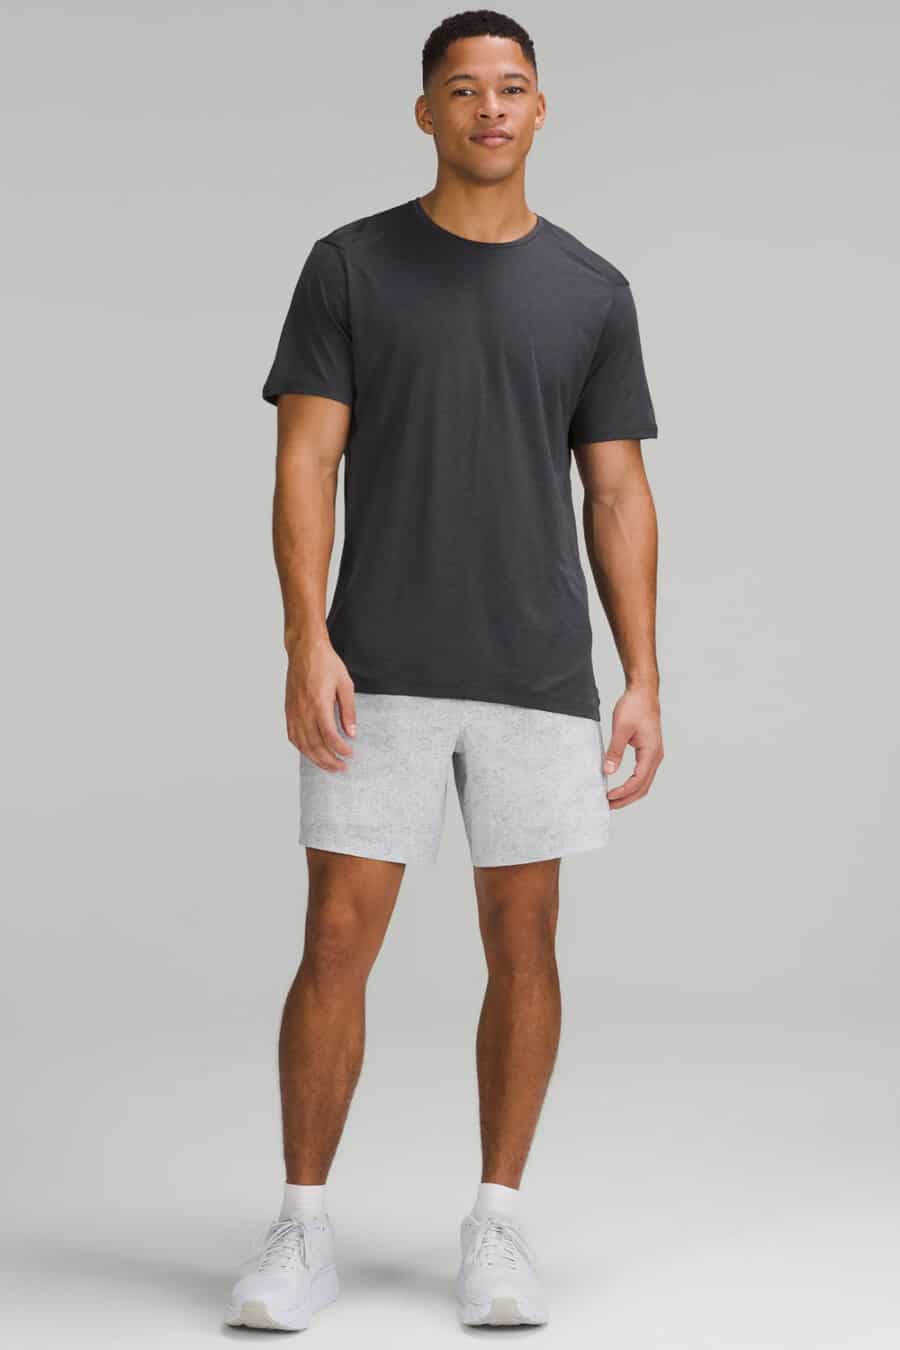 Men's grey athletic shorts, black T-shirt, white socks and white running sneakers outfit